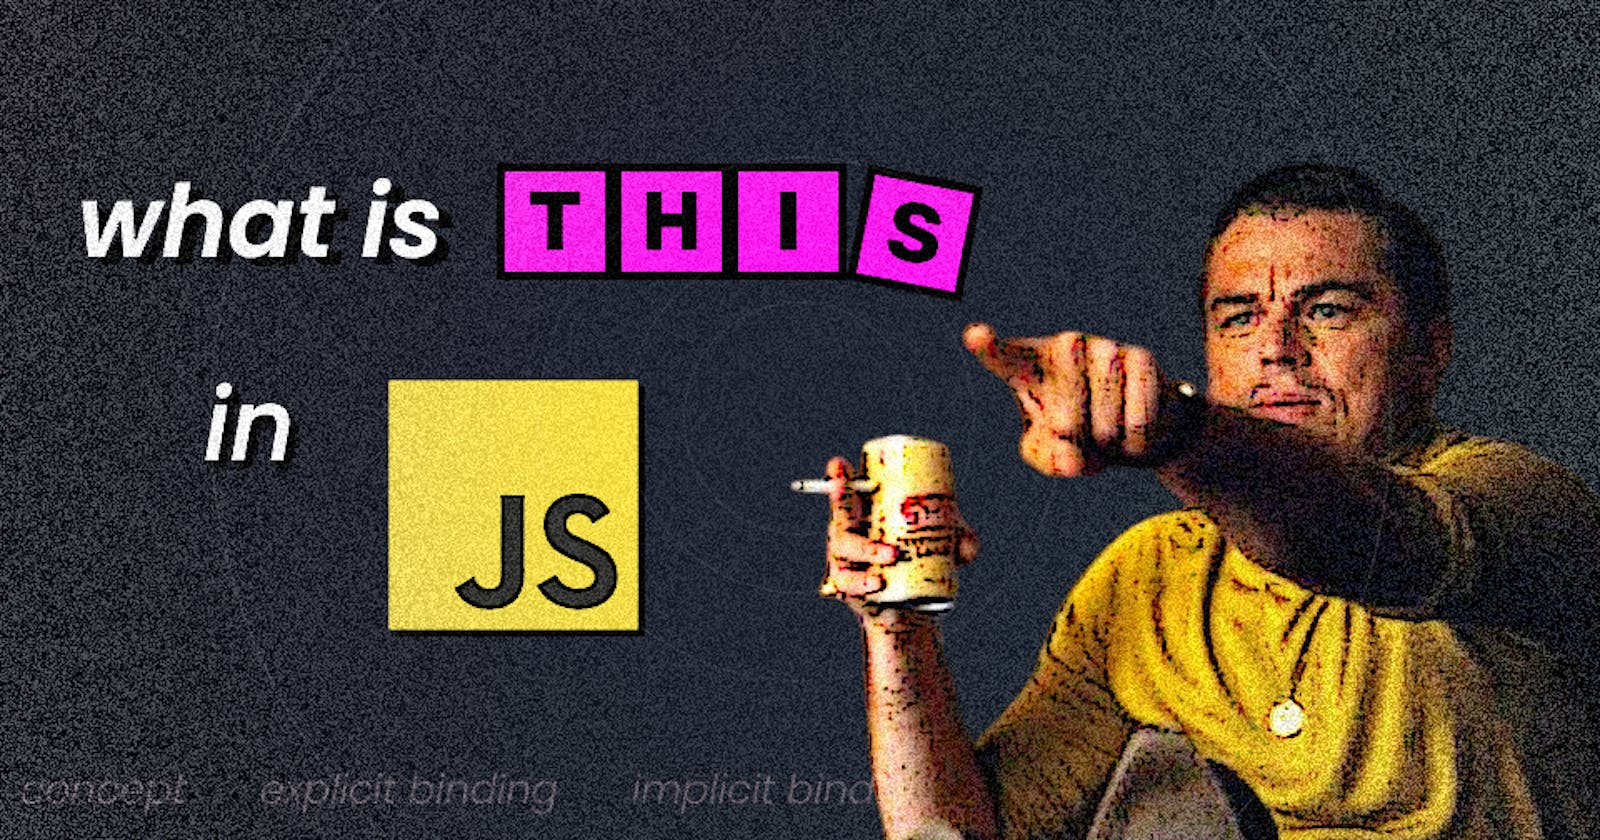 Learn this Keyword in JavaScript the Easy Way